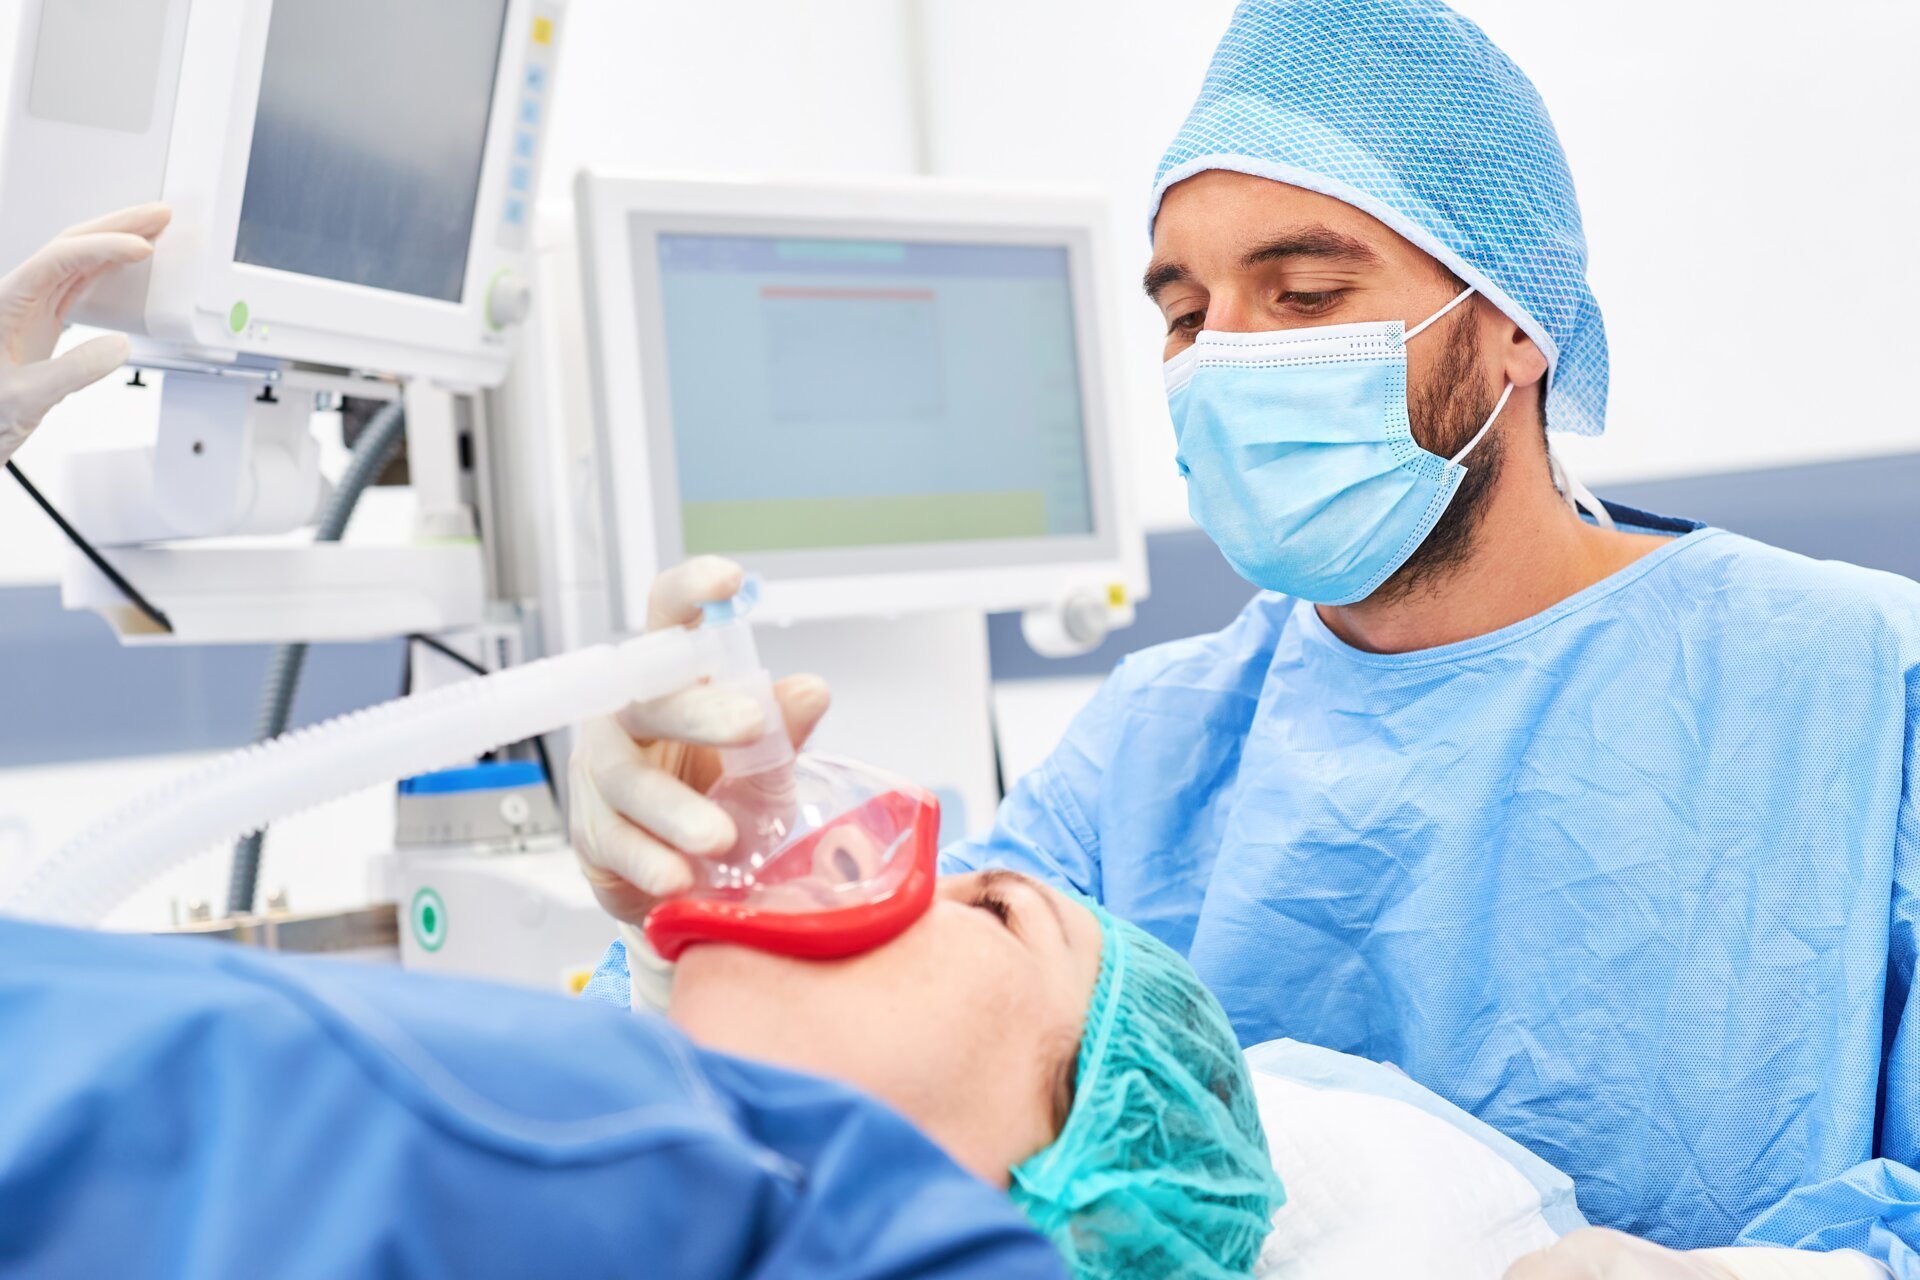 We Finally Know How General Anesthesia Knocks You Out